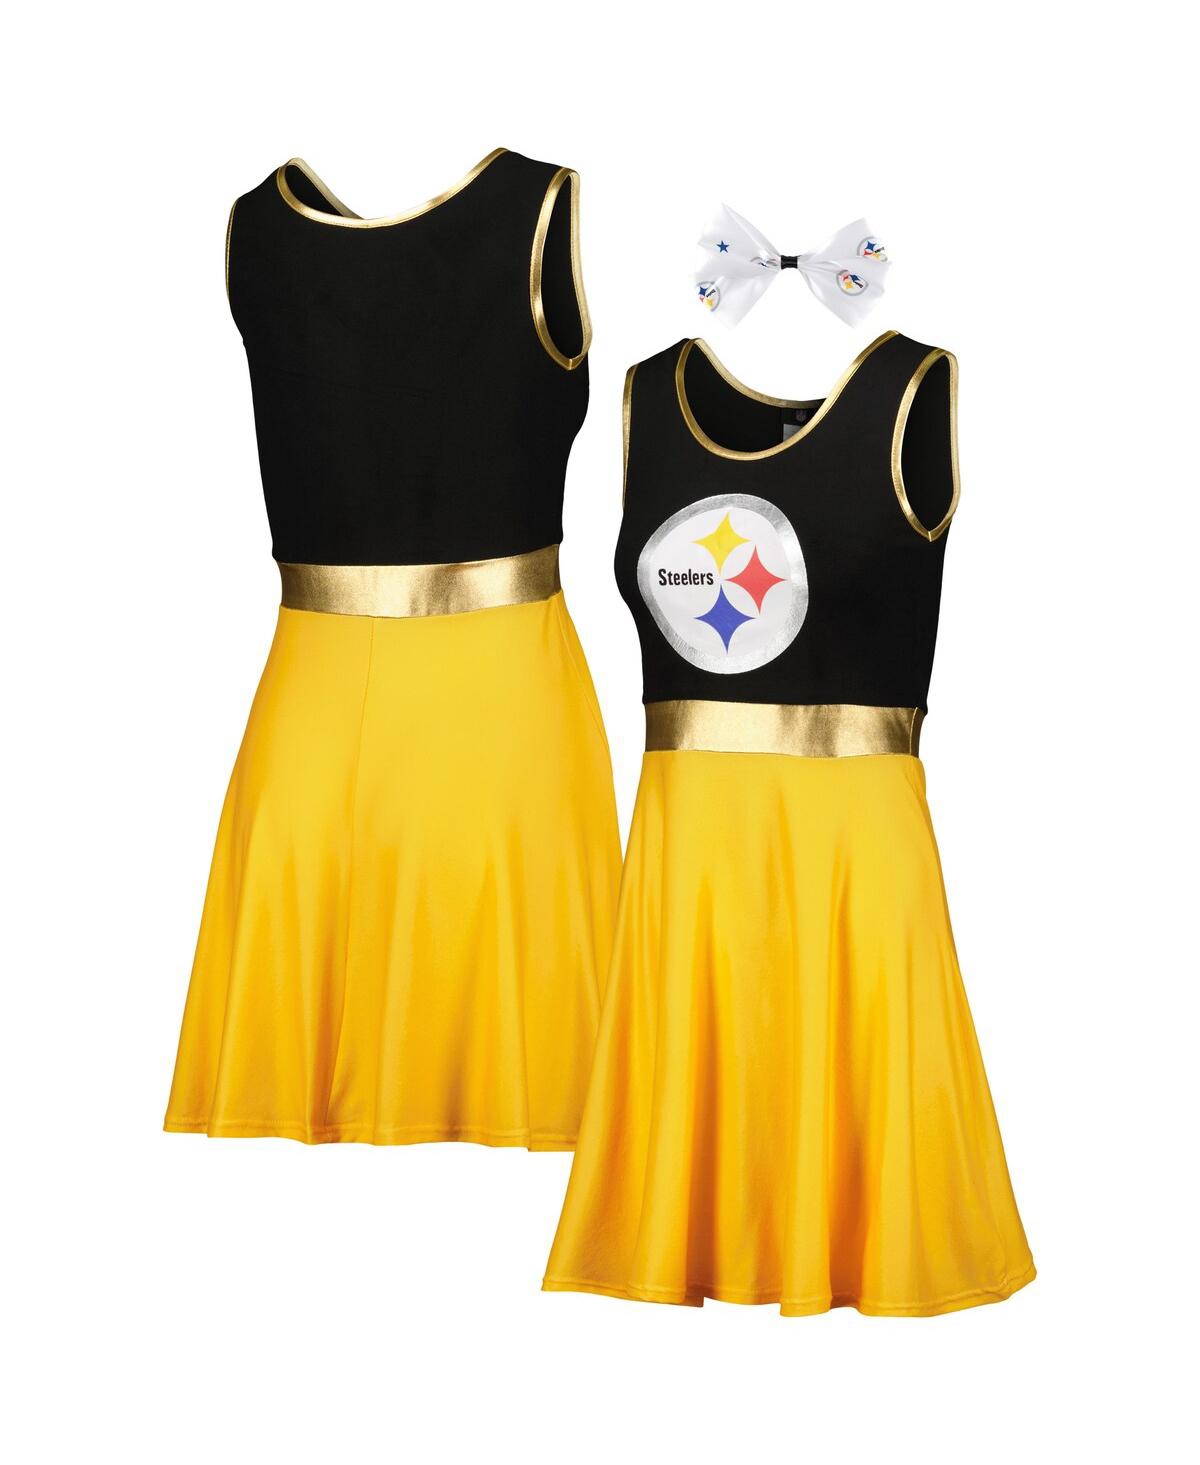 JERRY LEIGH WOMEN'S BLACK, GOLD PITTSBURGH STEELERS GAME DAY COSTUME DRESS SET